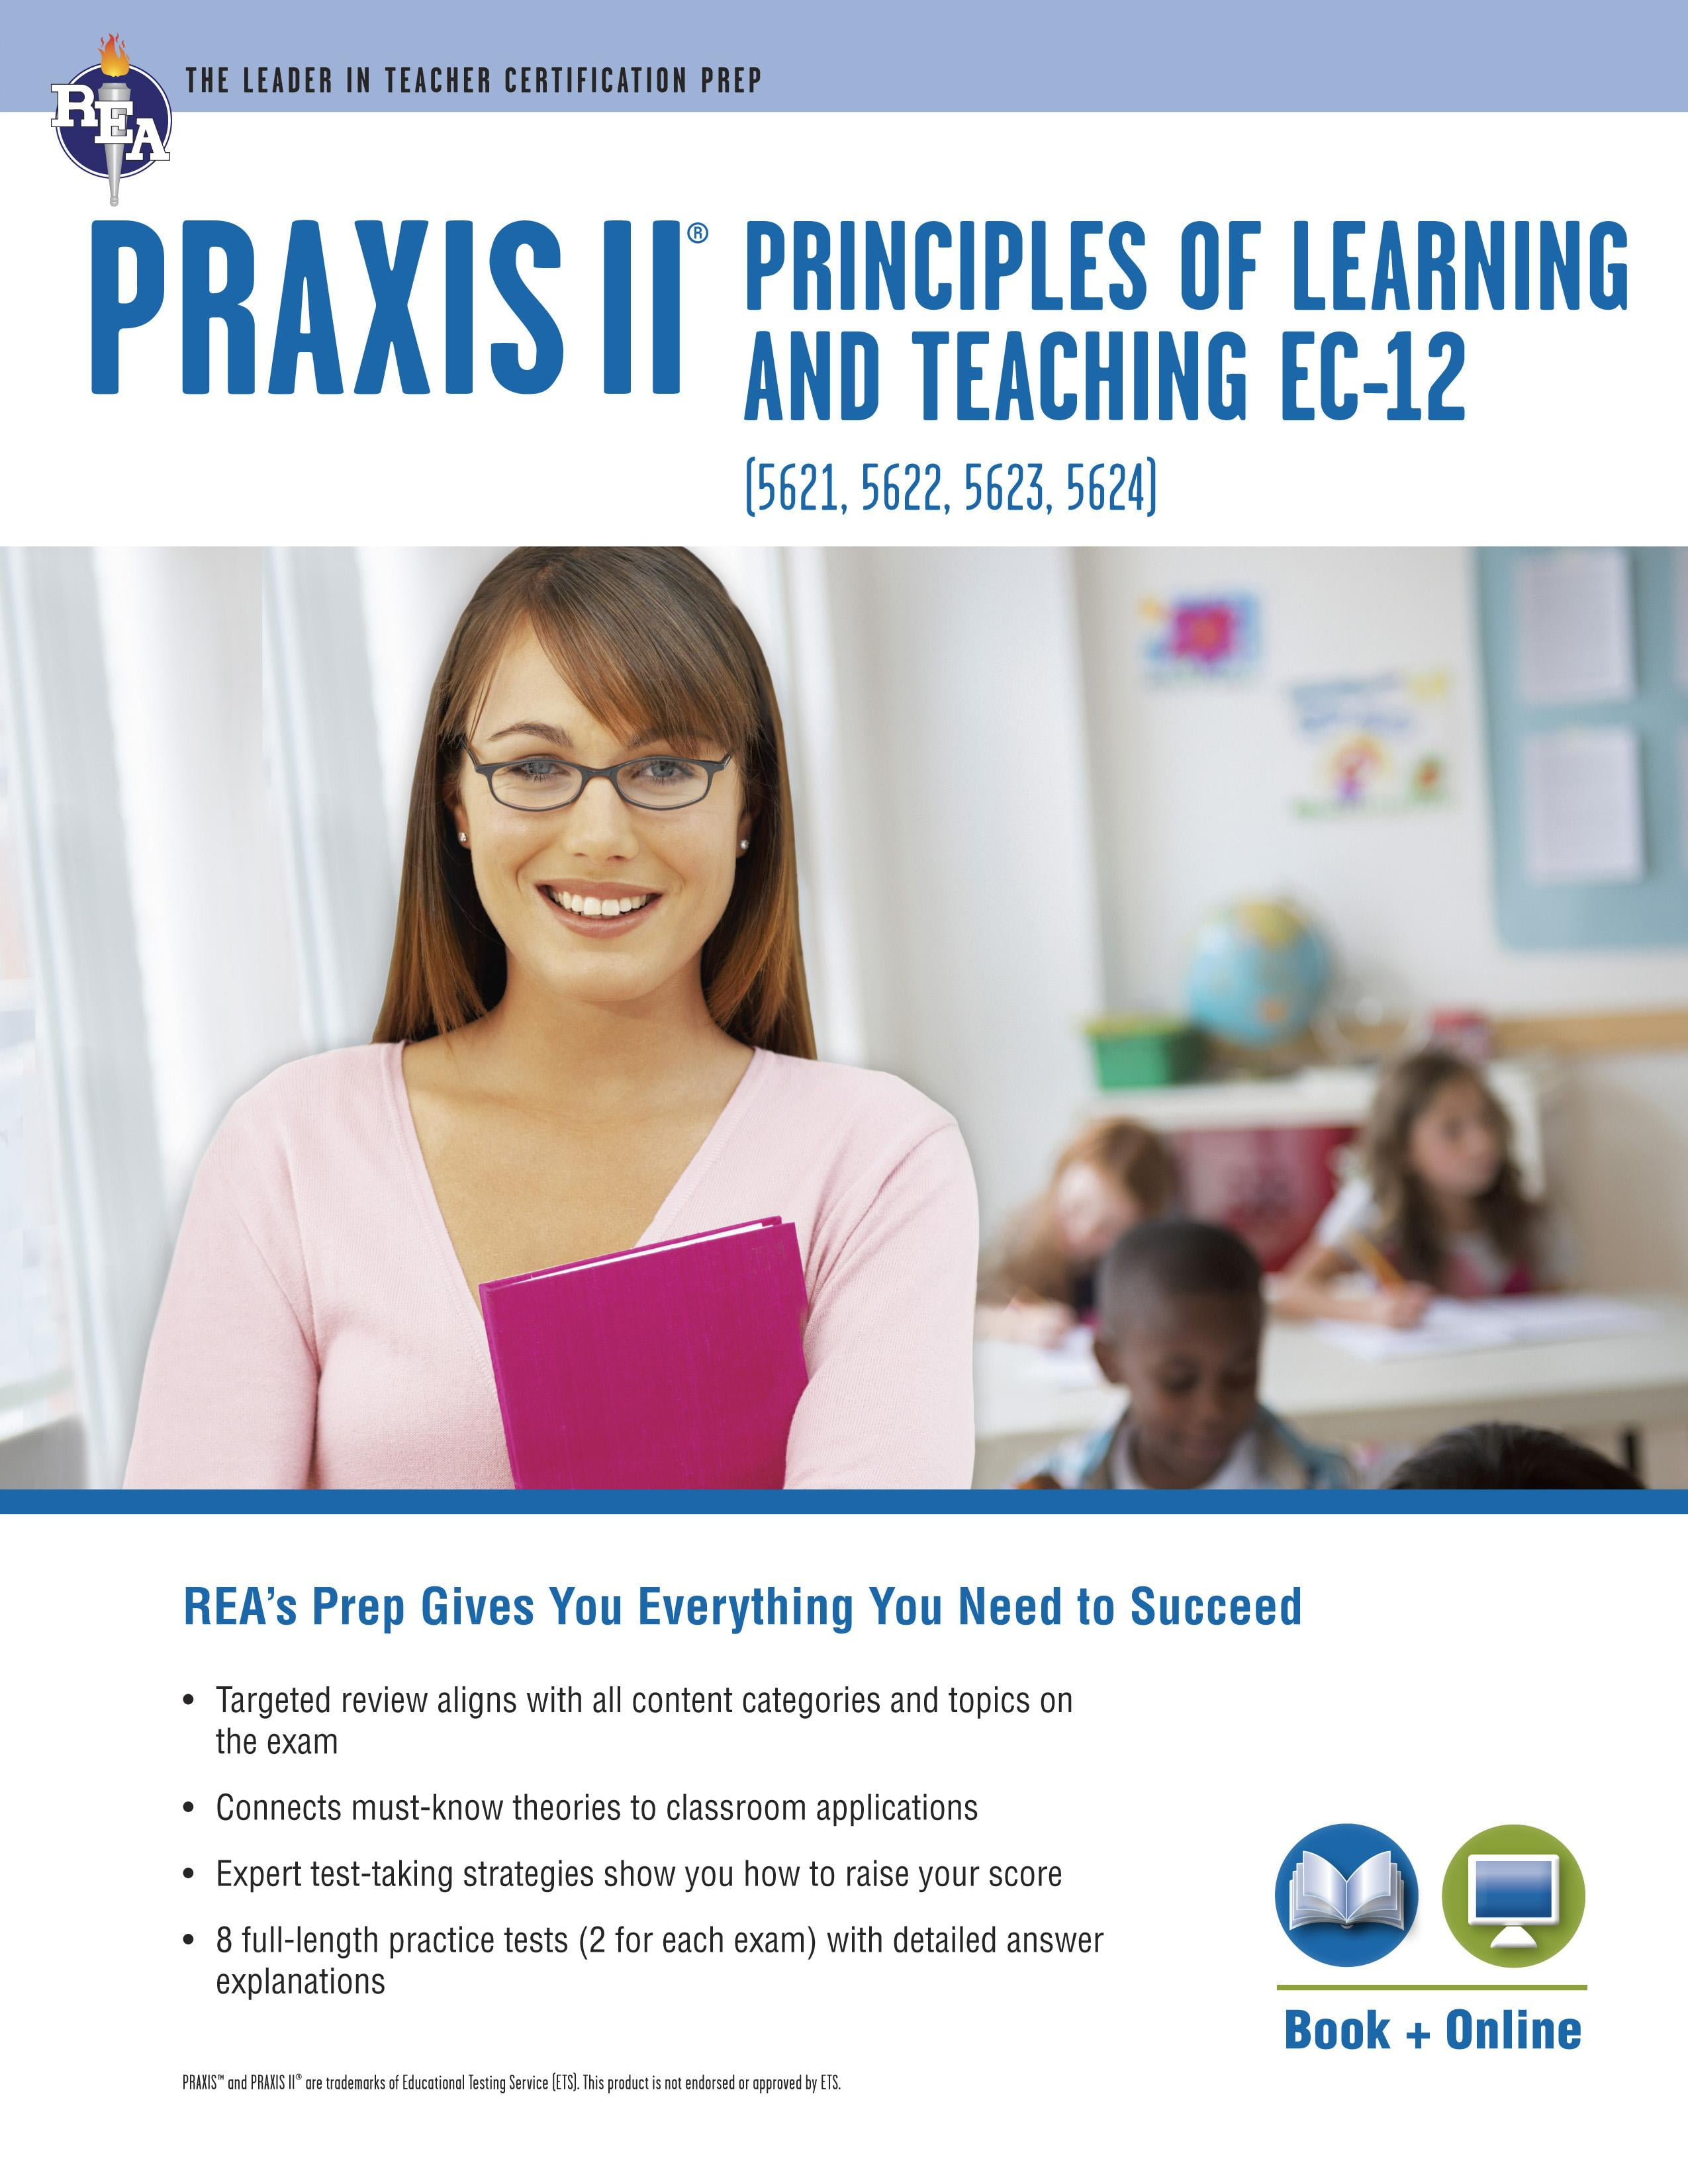 The Praxis® Tests. Test-teach-Test картинка. The Praxis Learning.